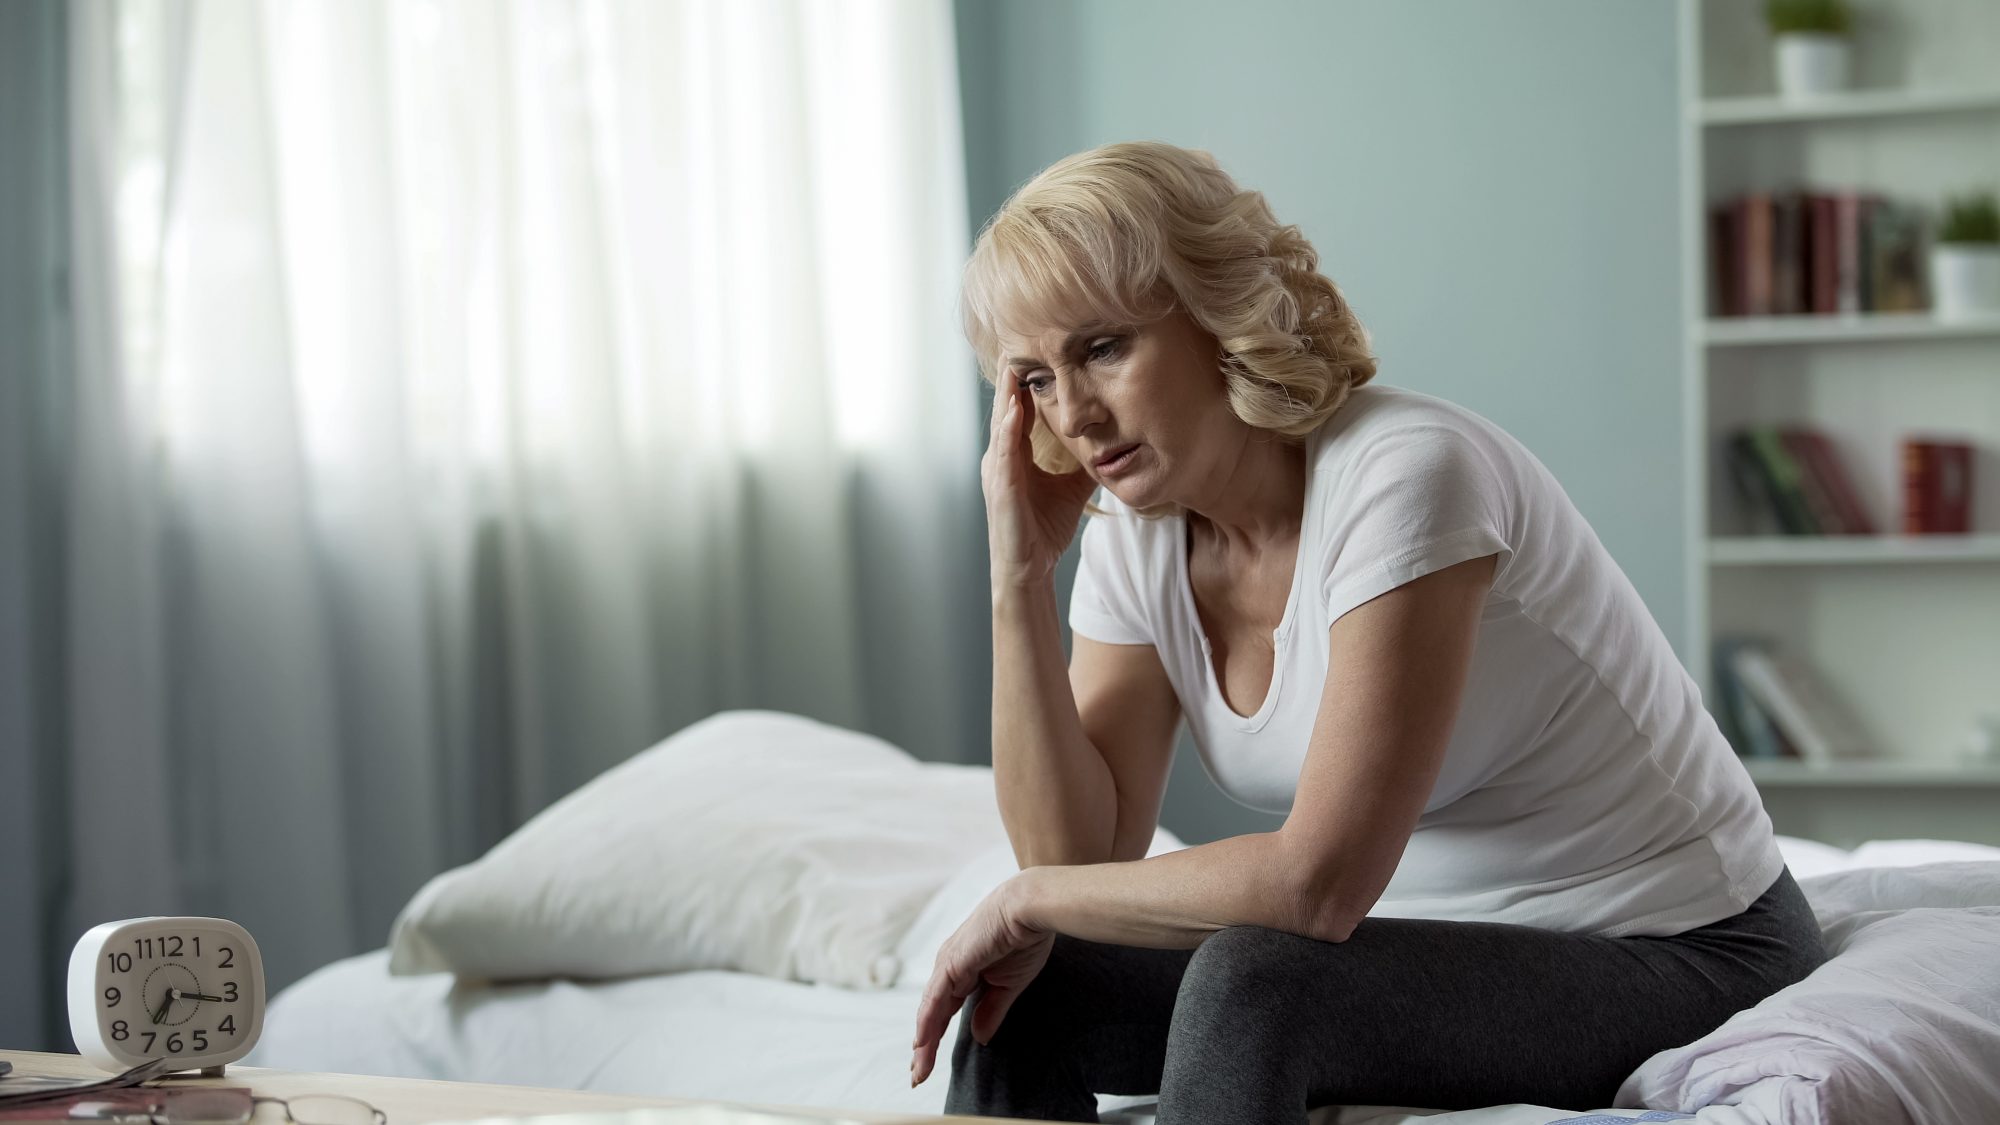 Middle aged woman sat on her bed going through menopause looking stressed and tired